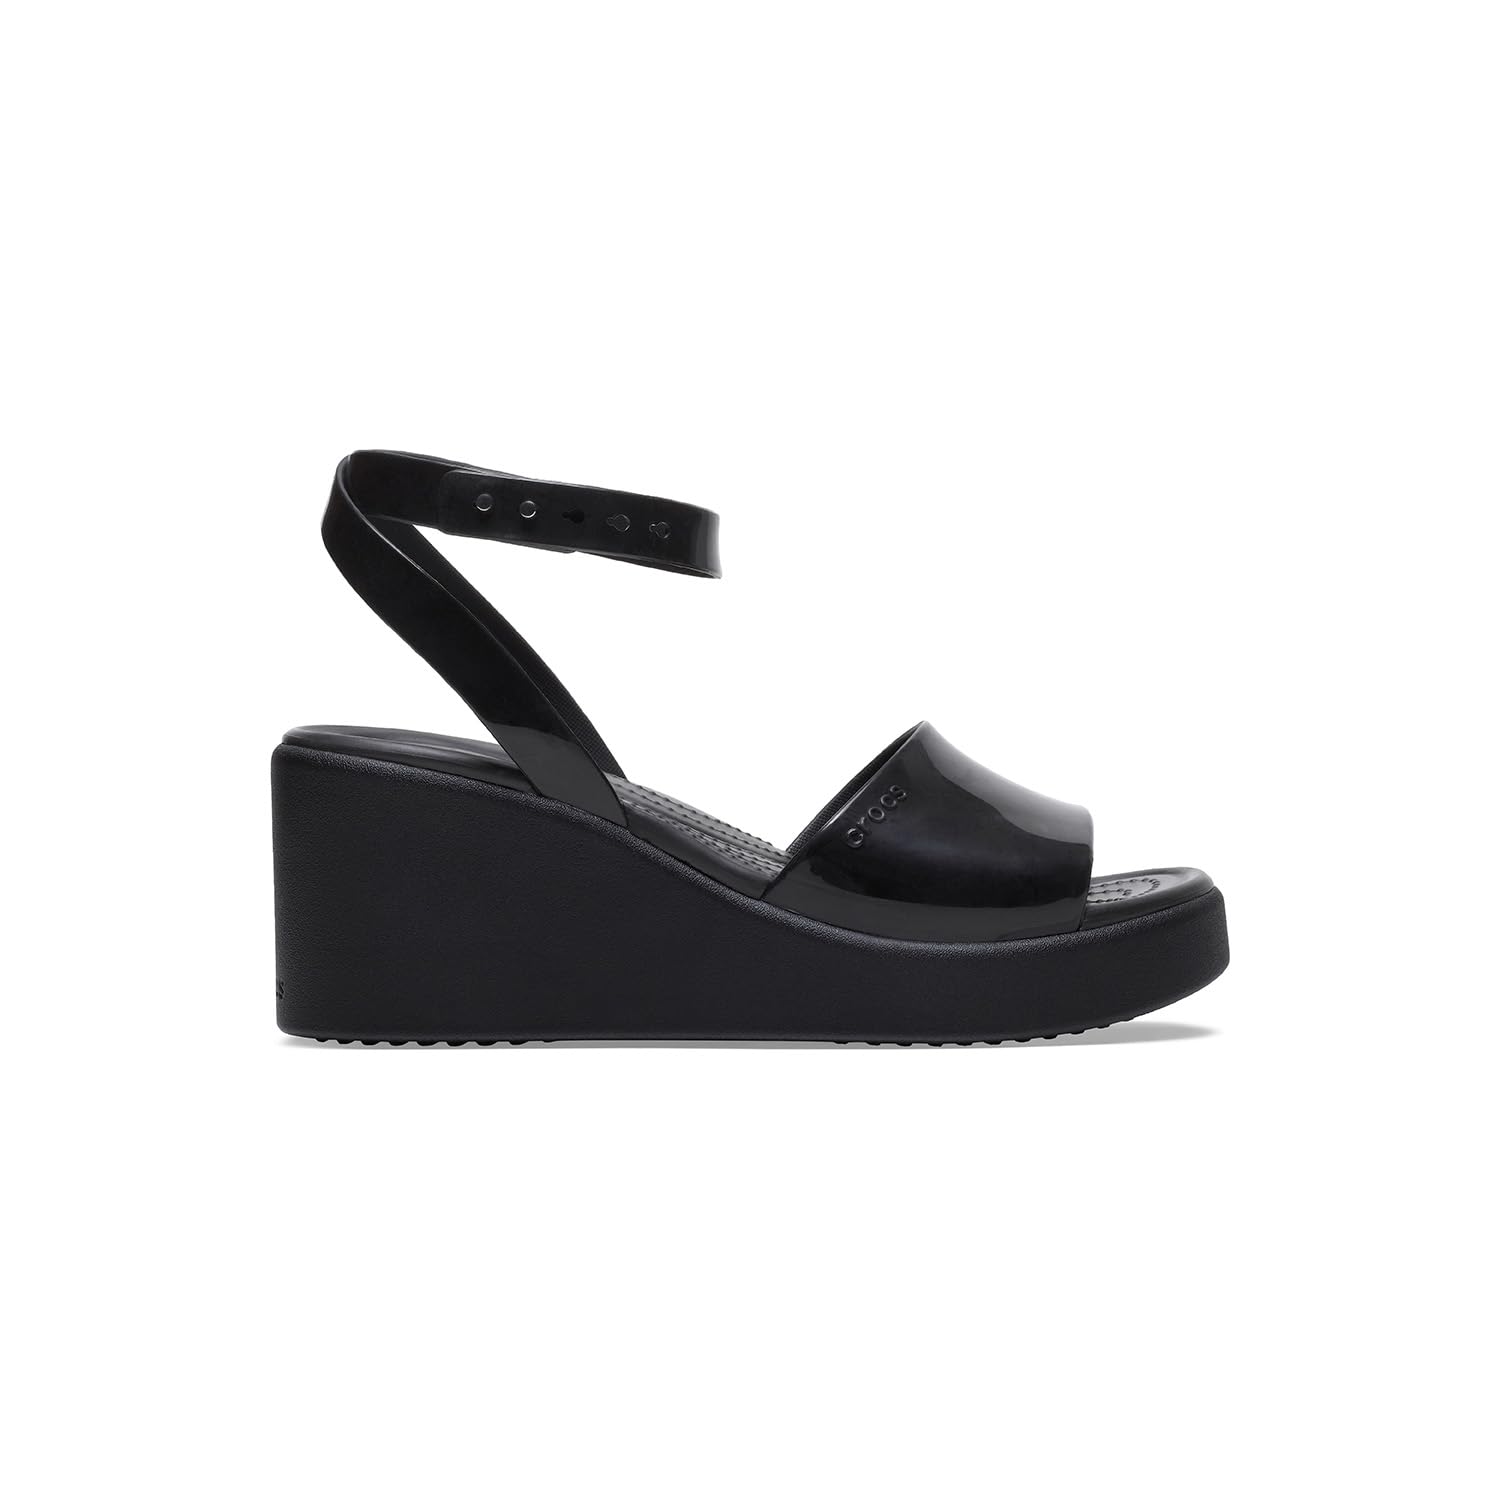 Crocs Brooklyn Ankle Strap Wedges for Women - Thermoplastic Upper - Thermoplastic Lining and Footbed